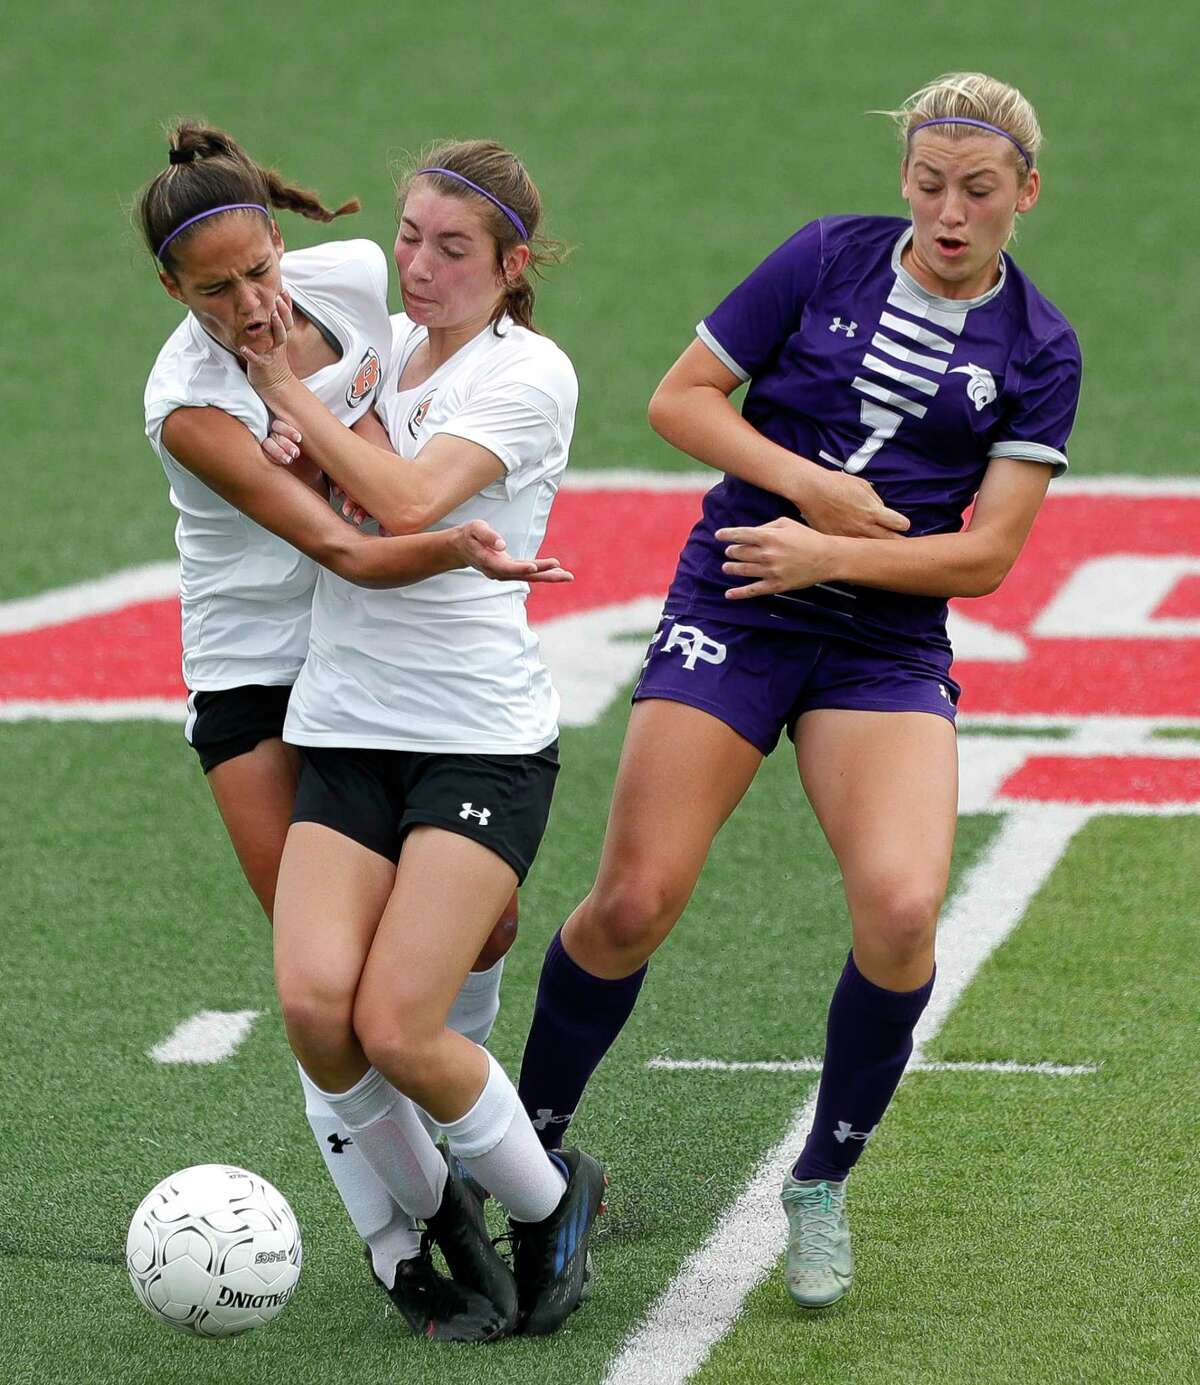 Rockwall defenders Ayla Garcia, left, and Savanna Clark collide while going for the ball against Fort Bend Ridge Point forward Zoe Main (7) in the second half of a Class 6A girls state semifinal match during the UIL State Soccer Championships, Friday, April 15, 2022, in Georgetown.